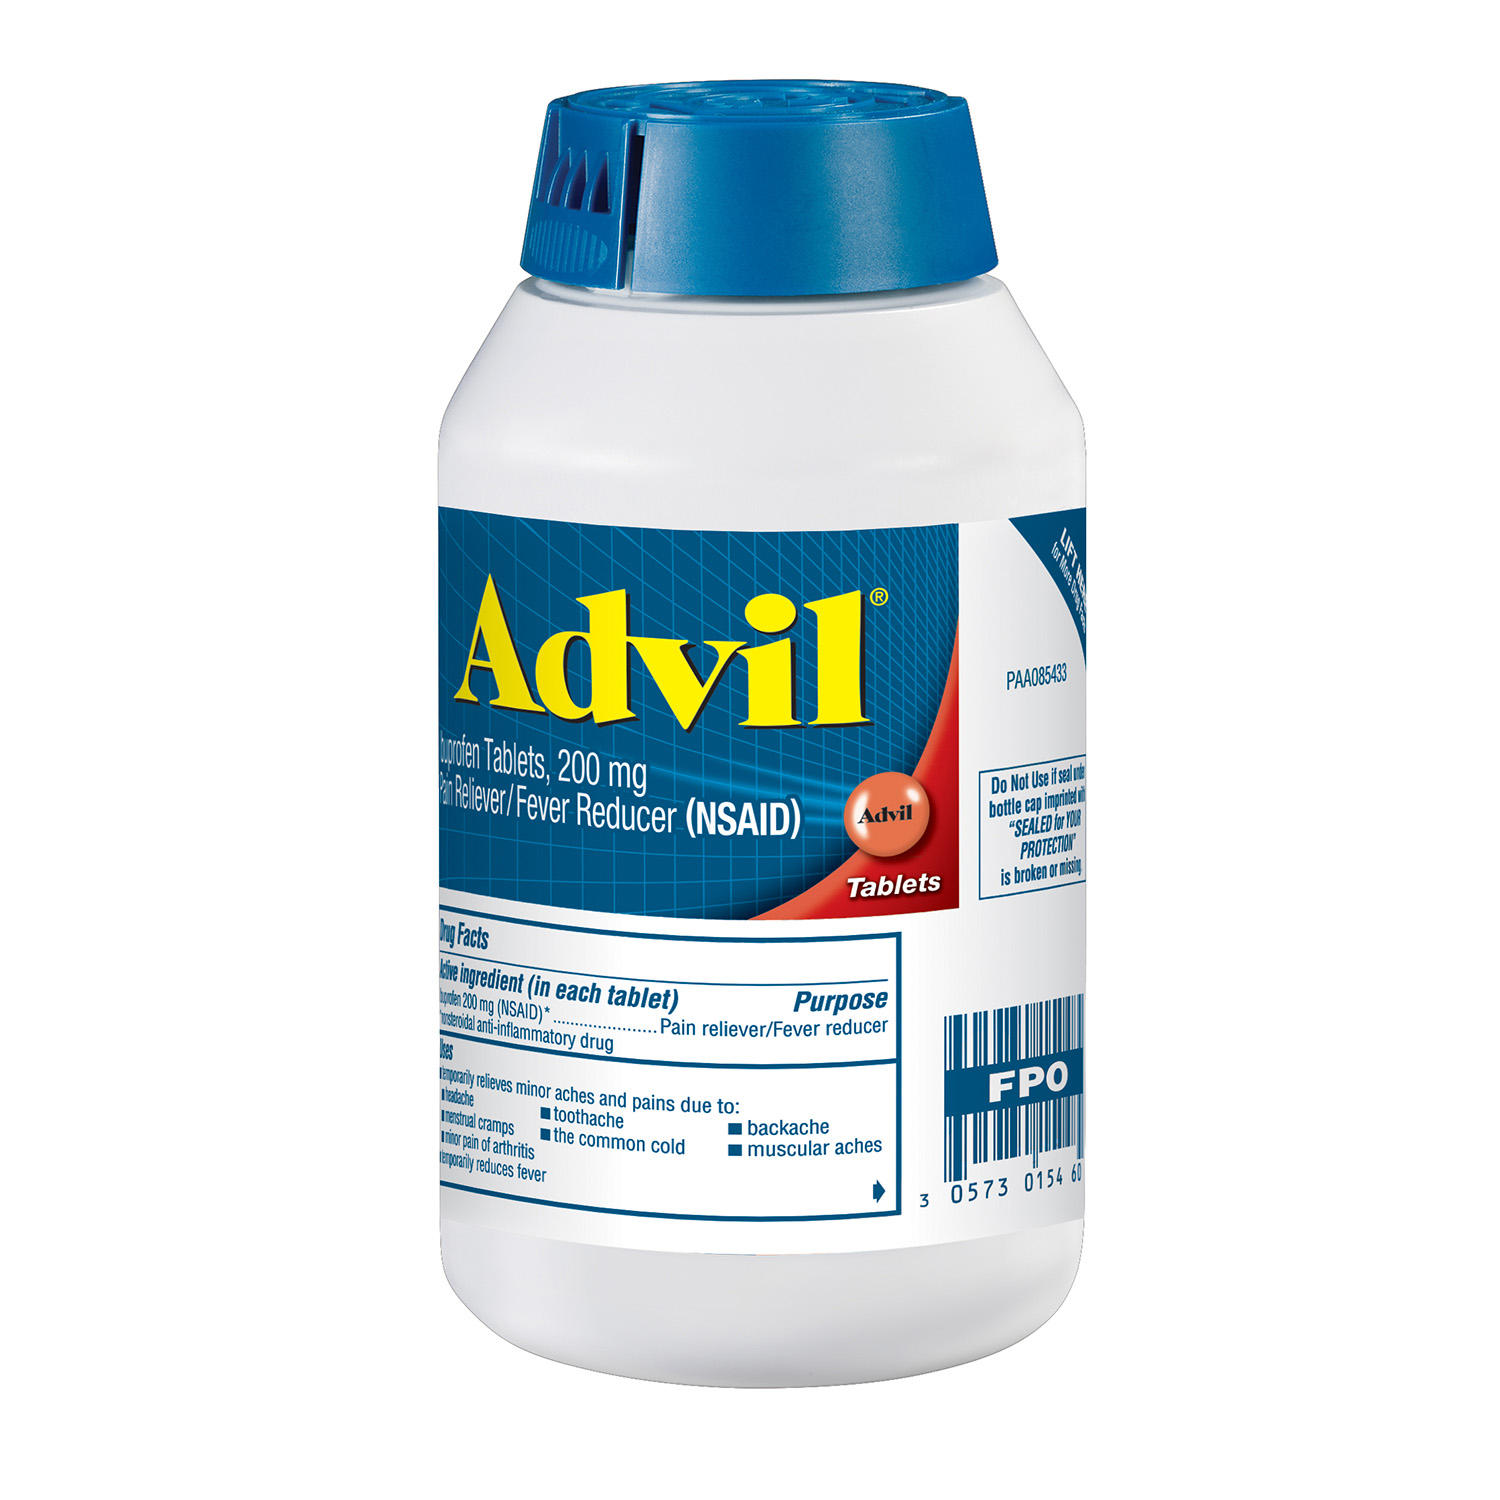 Advil Ibuprofen 200 Mg., Pain Reliever/Fever Reducer, 360 Tablets - image 5 of 6